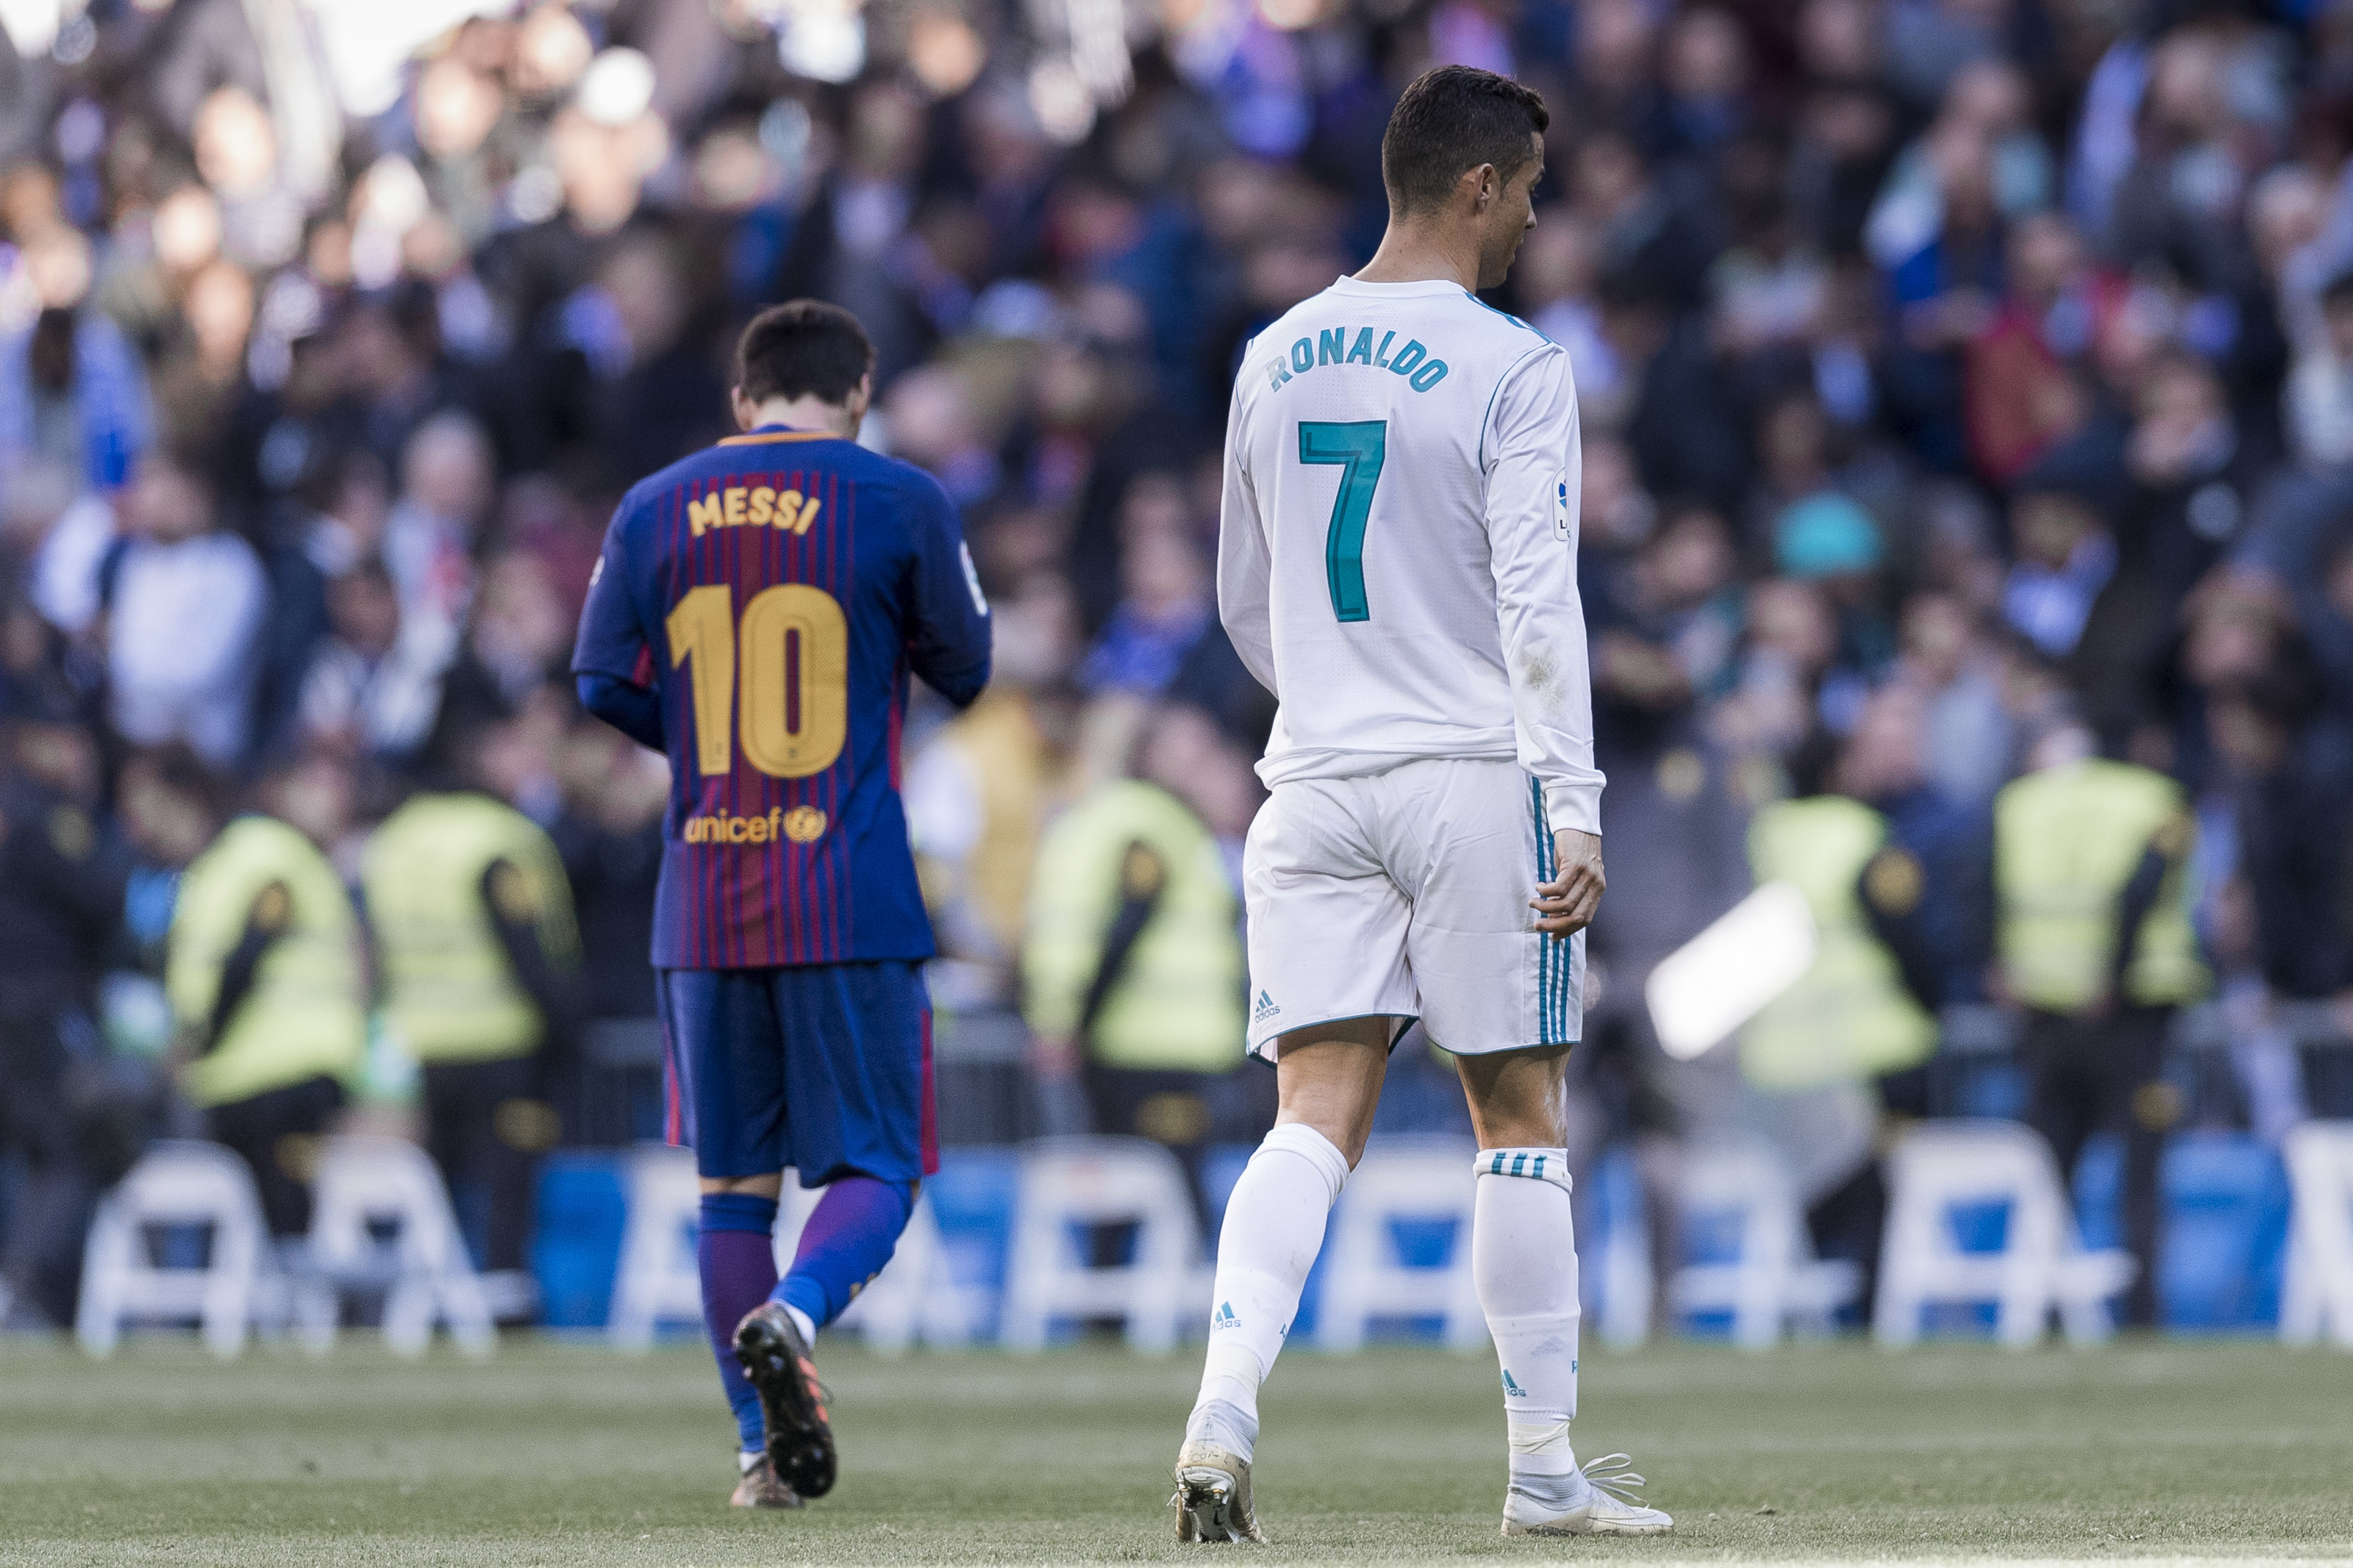 Picture of the century as Lionel Messi and Cristiano Ronaldo